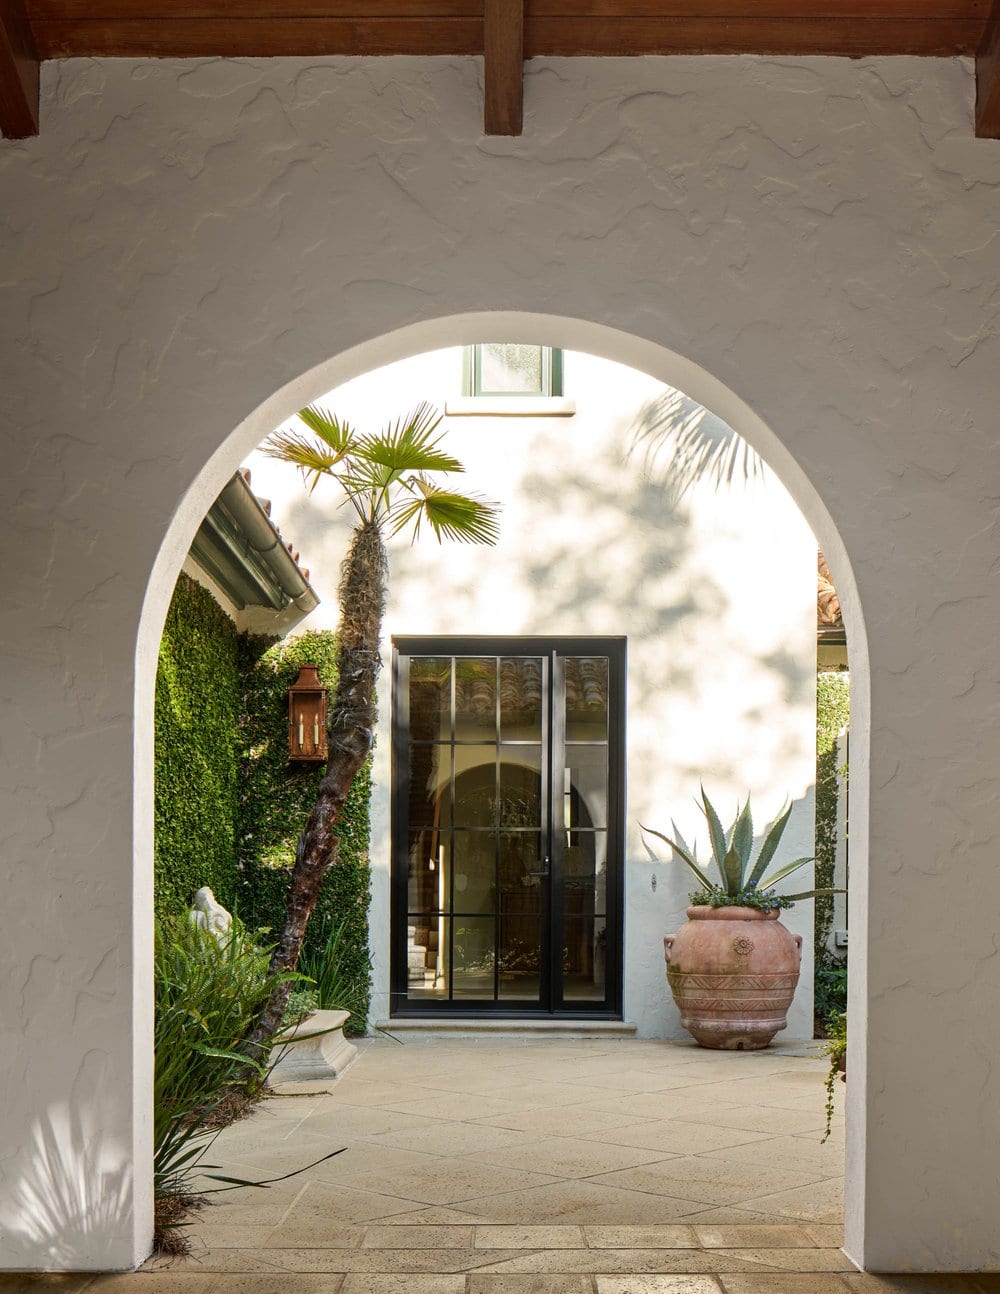 Mary Beth Wagner Interiors - Nathan Schroder Photography - Sea Island - Splendid in Sea Island - entry - foyer - arch- curb appeal